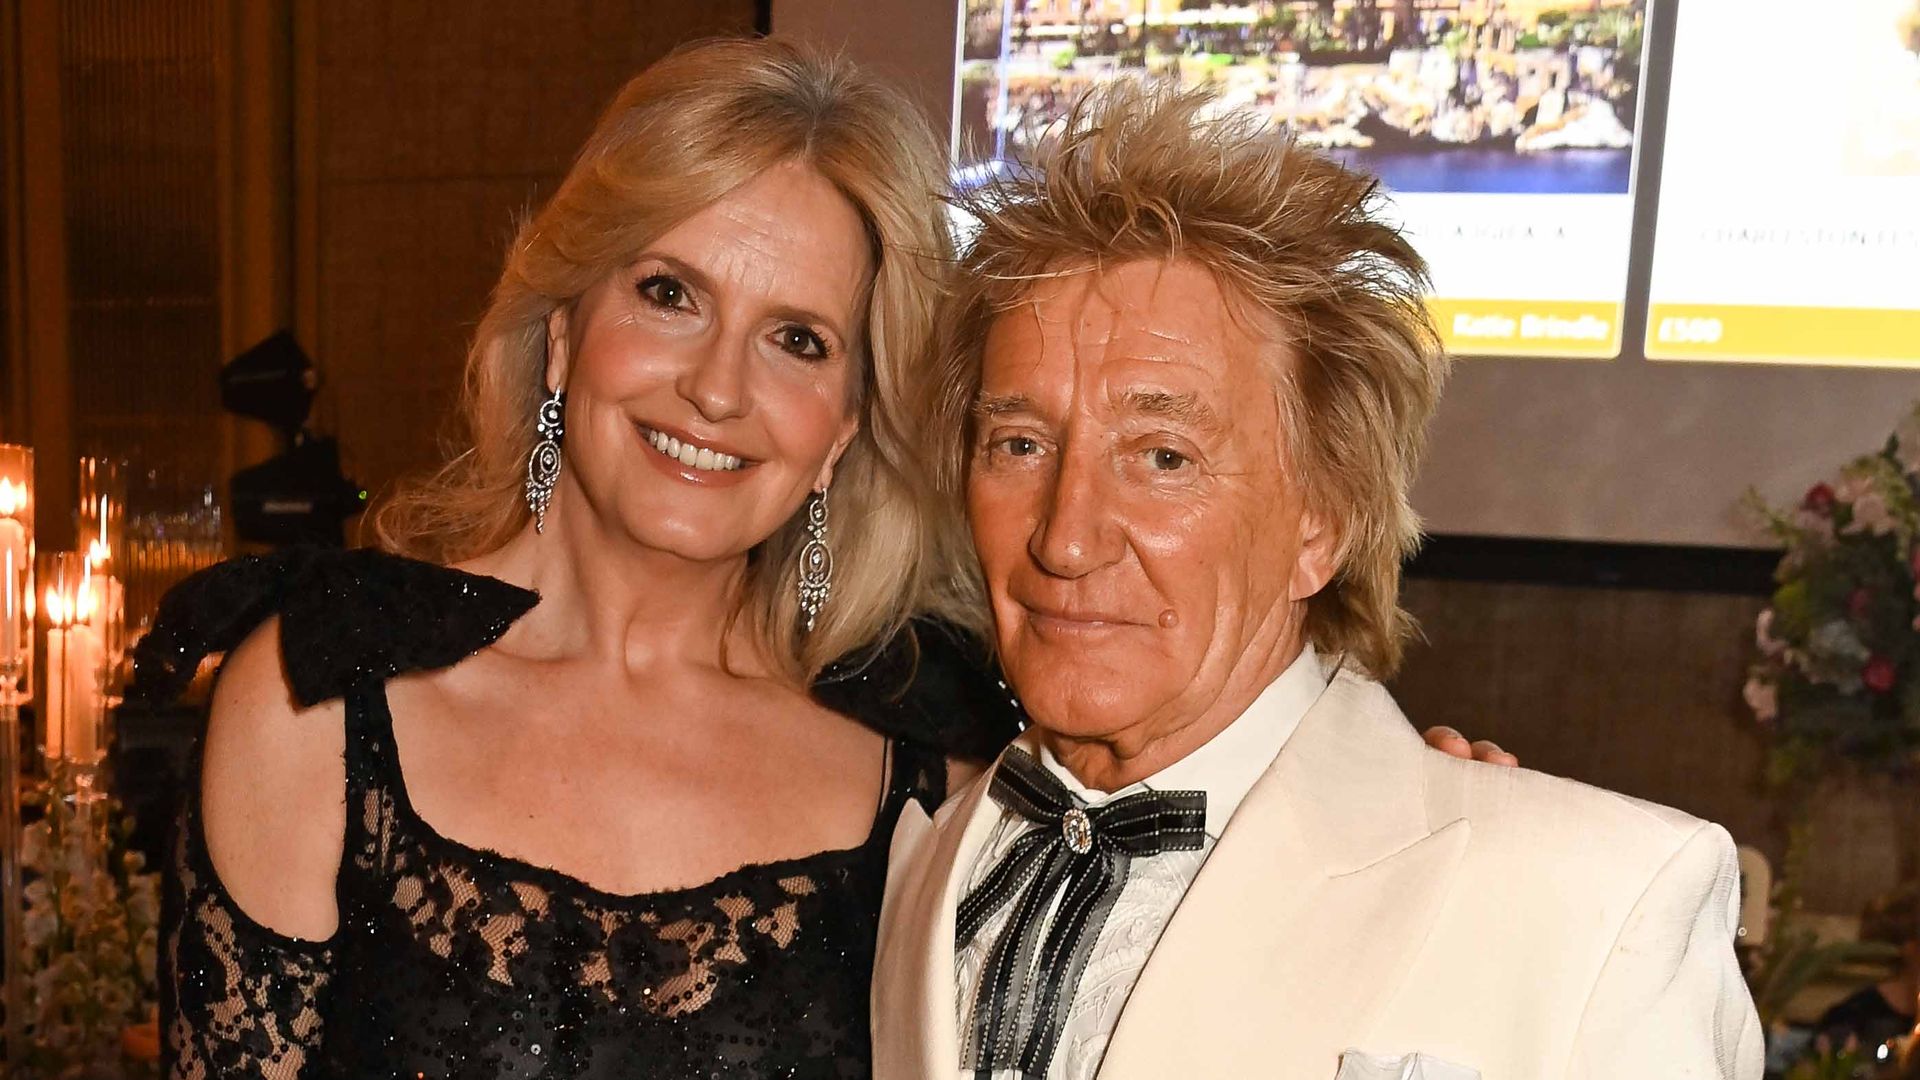 Penny Lancaster is a bombshell in daring thigh-split dress to mark celebrations with Rod Stewart